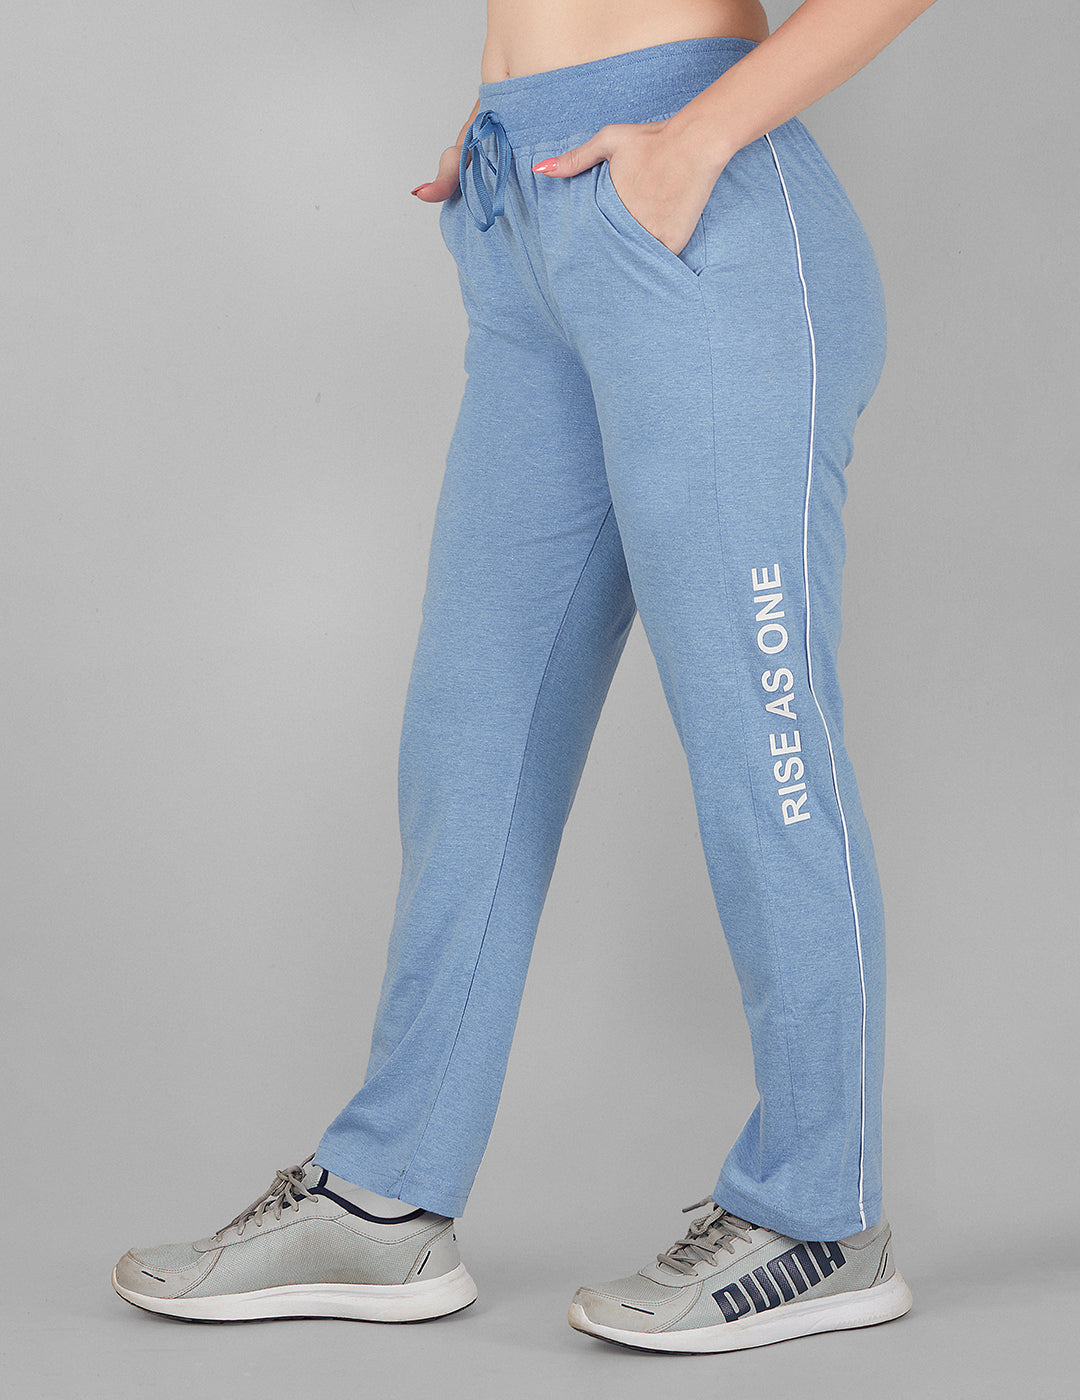 Cotton Track Pants For Women Regular Fit Activewear With Pockets (Sky Blue)  – Cupid Clothings